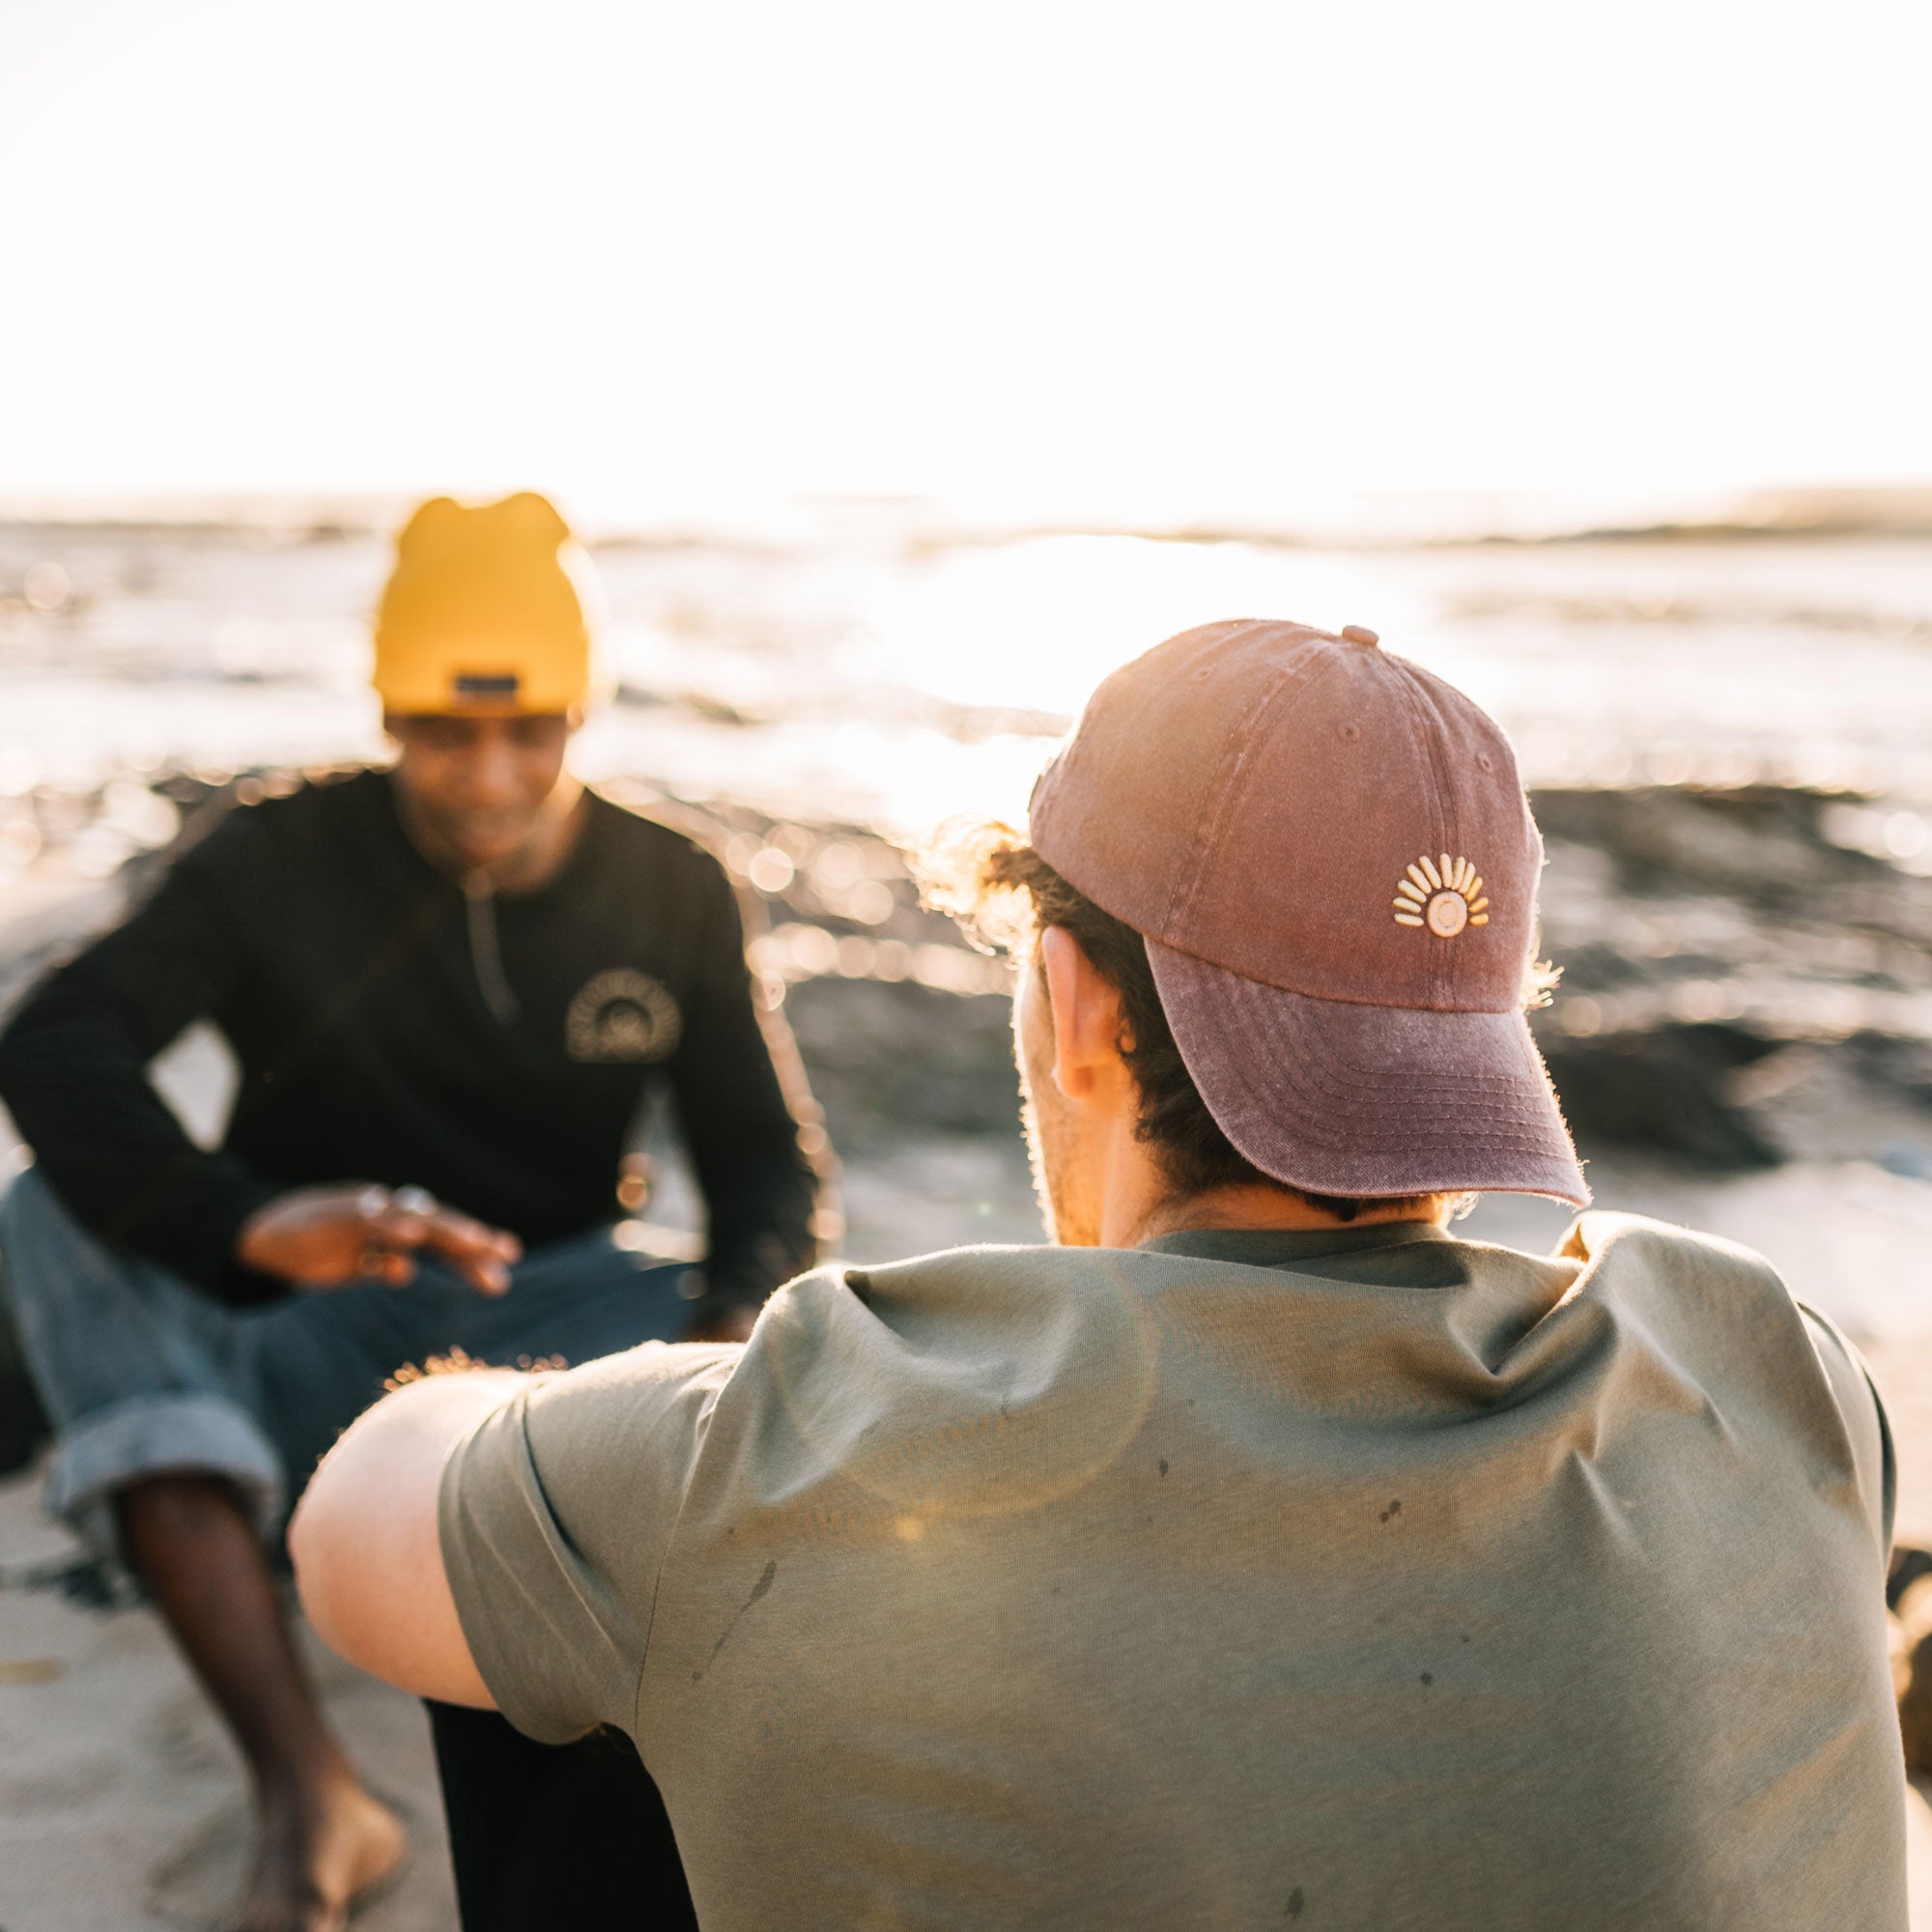 The Maroon Sunset Cap - Stokedthebrand. Lifestyle products for outdoor adventures. Made in South Africa